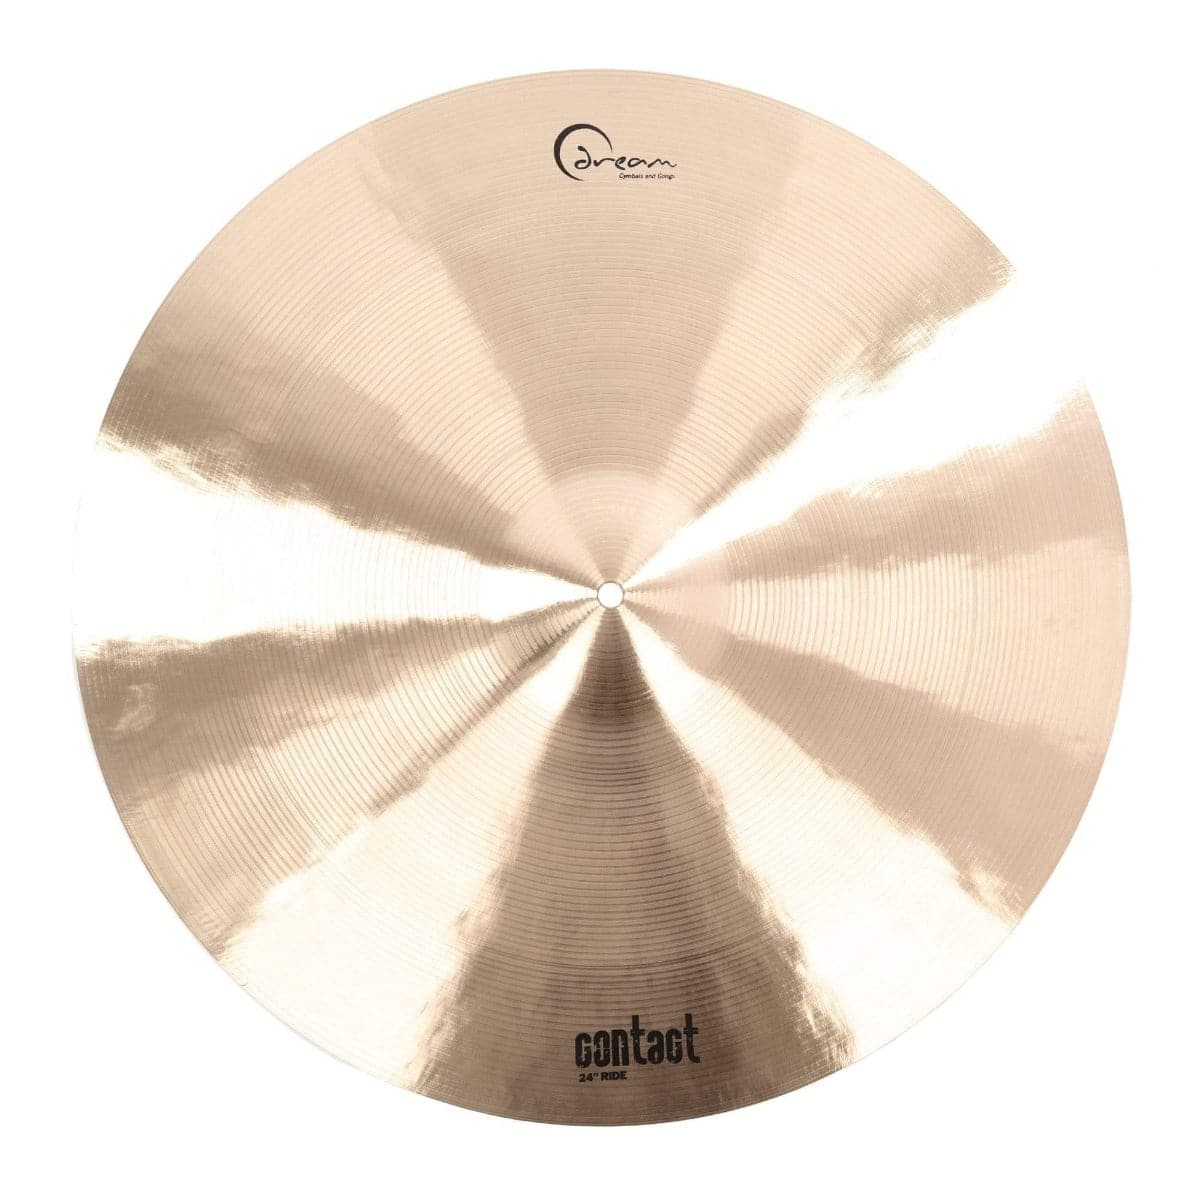 Dream Contact Series Ride Cymbal 24